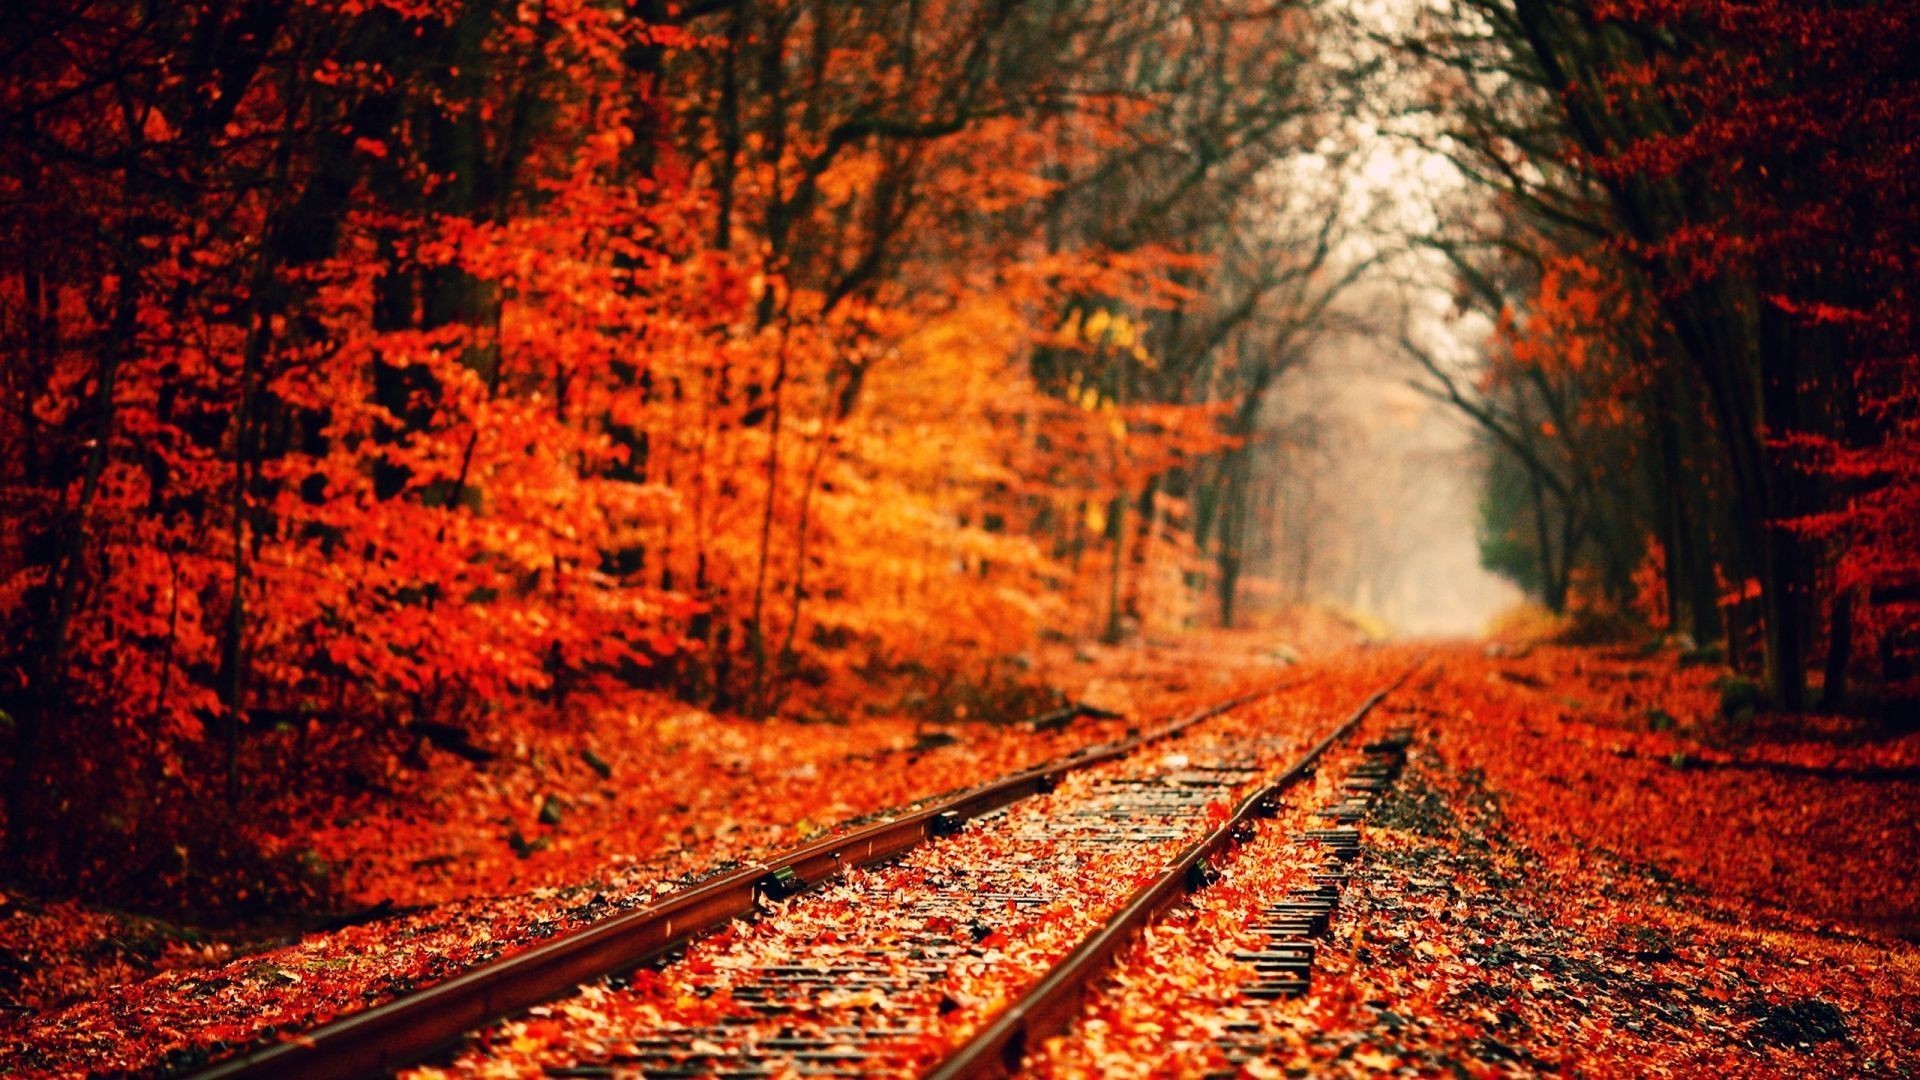 1920x1080 2560x1600 Collection of Autumn Desktop Backgrounds Hd on HDWallpapers